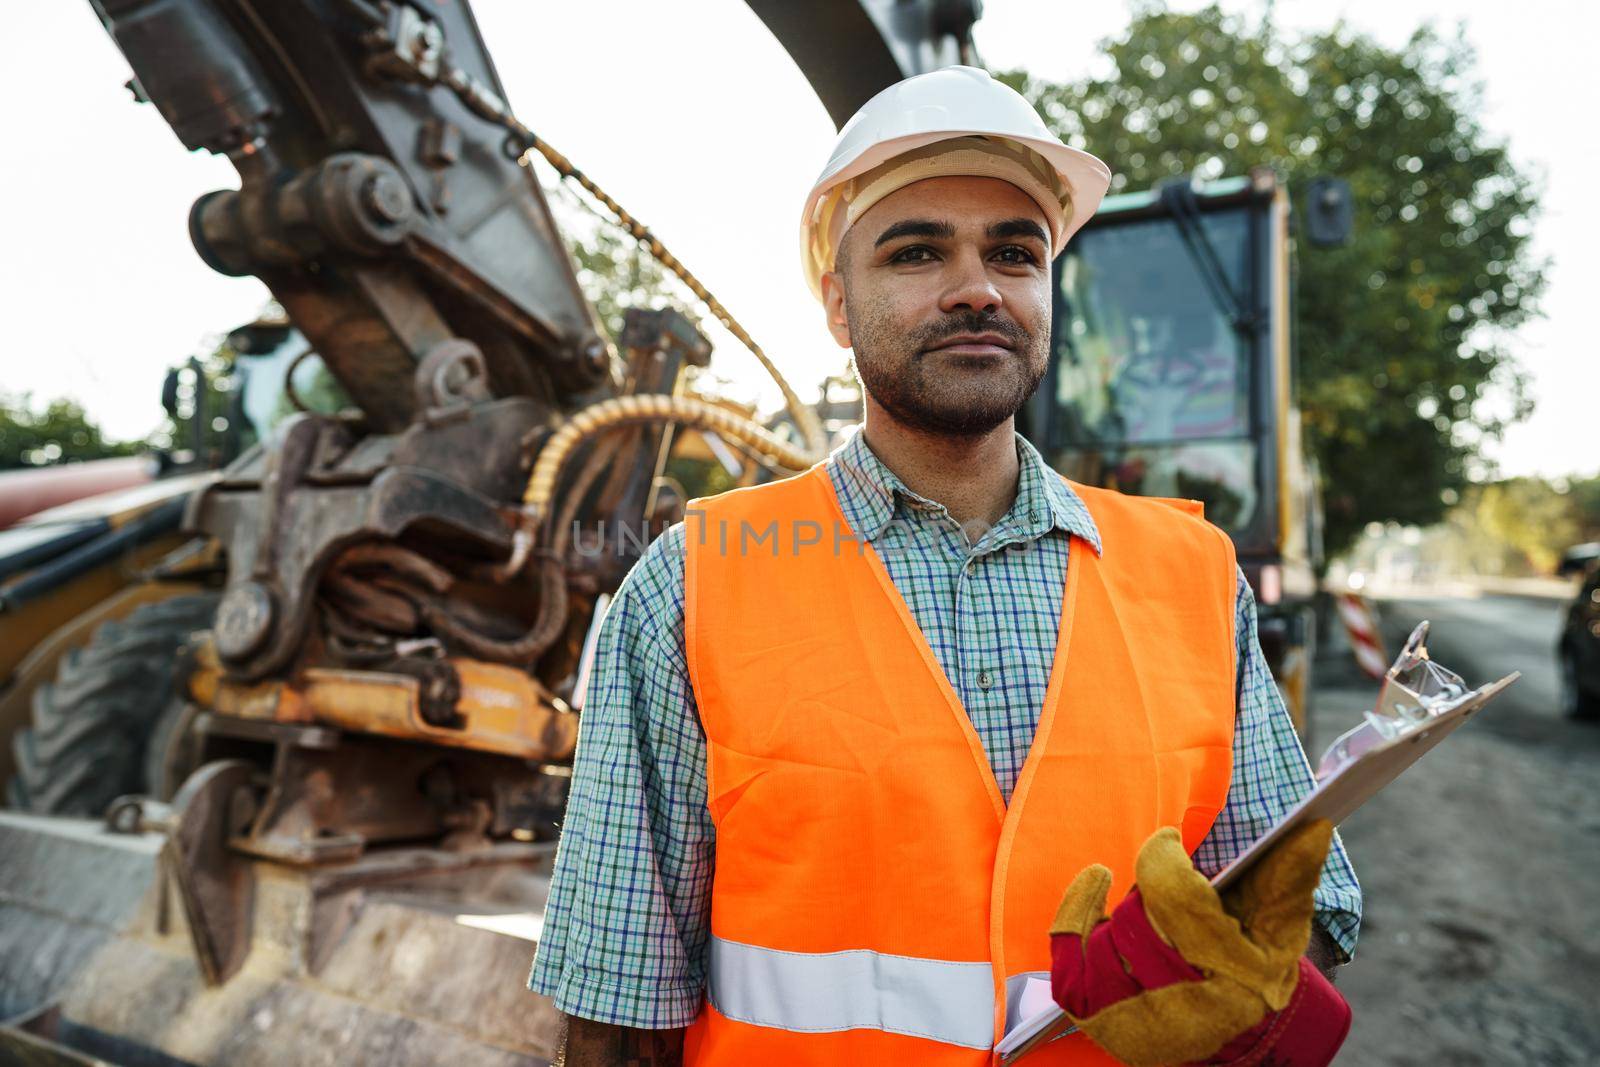 Young man engineer in workwear standing in construction site with clipboard, close up portrait